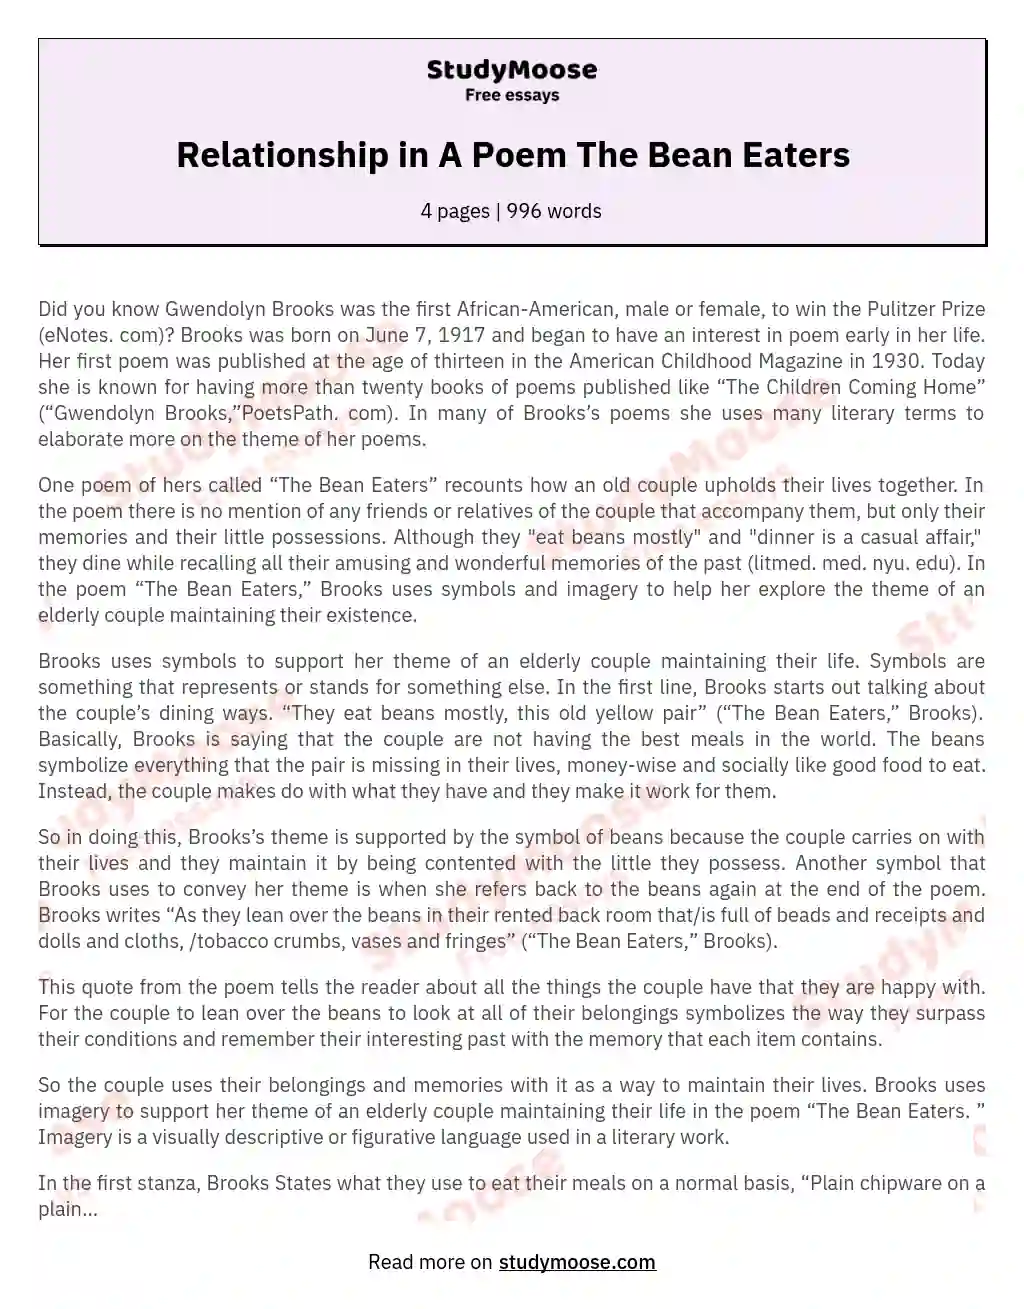 Relationship in A Poem The Bean Eaters essay